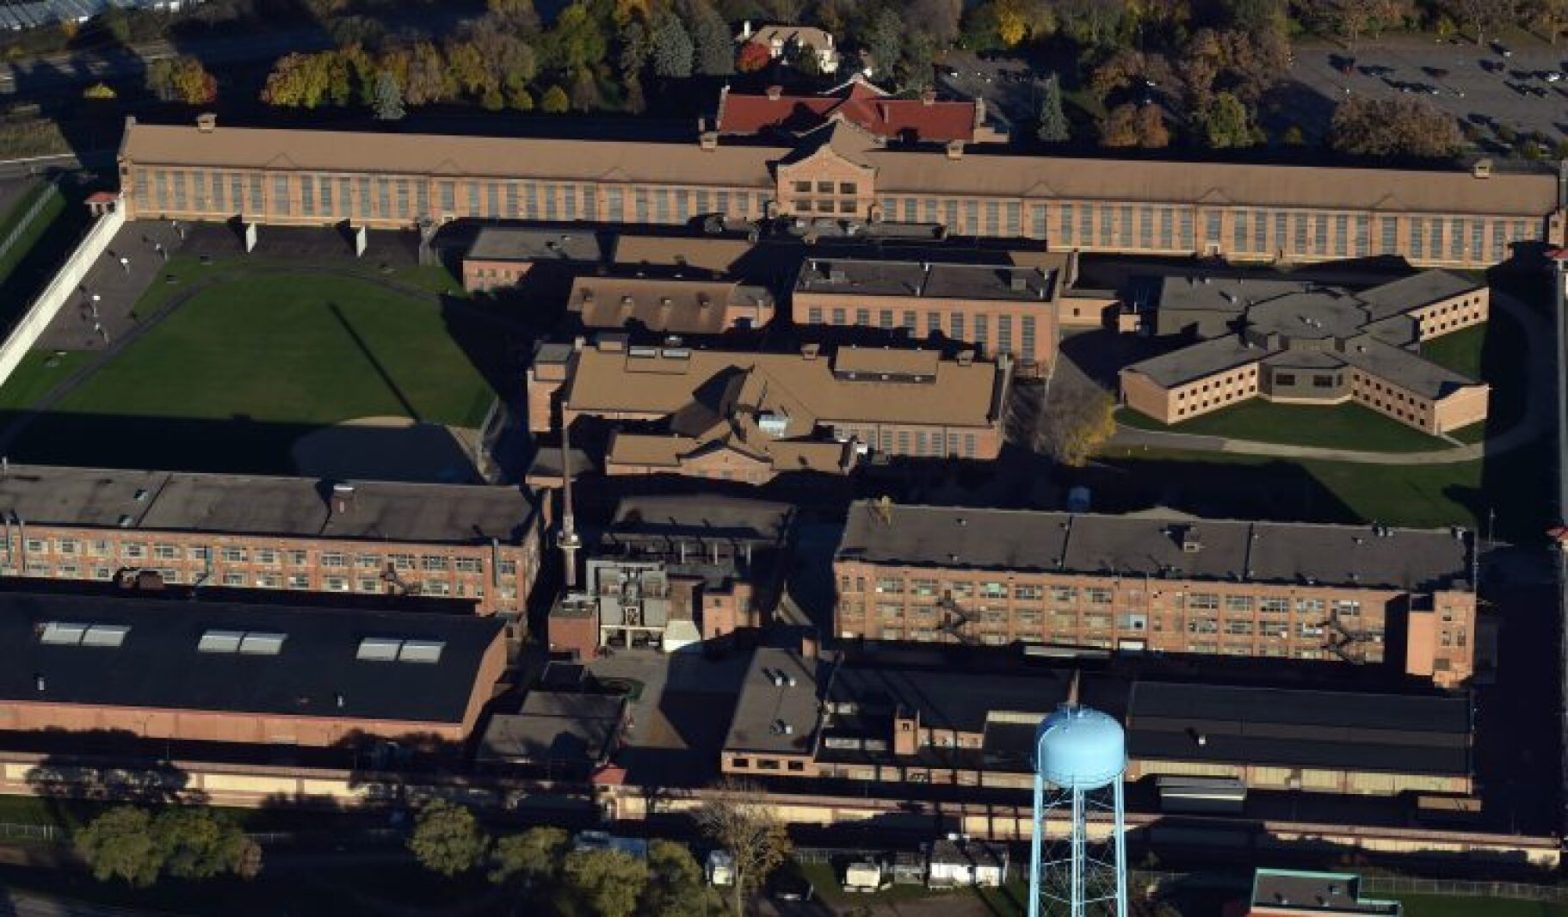 Two Corrections Officers Assaulted by Inmates at Stillwater Prison, Facility on Lockdown